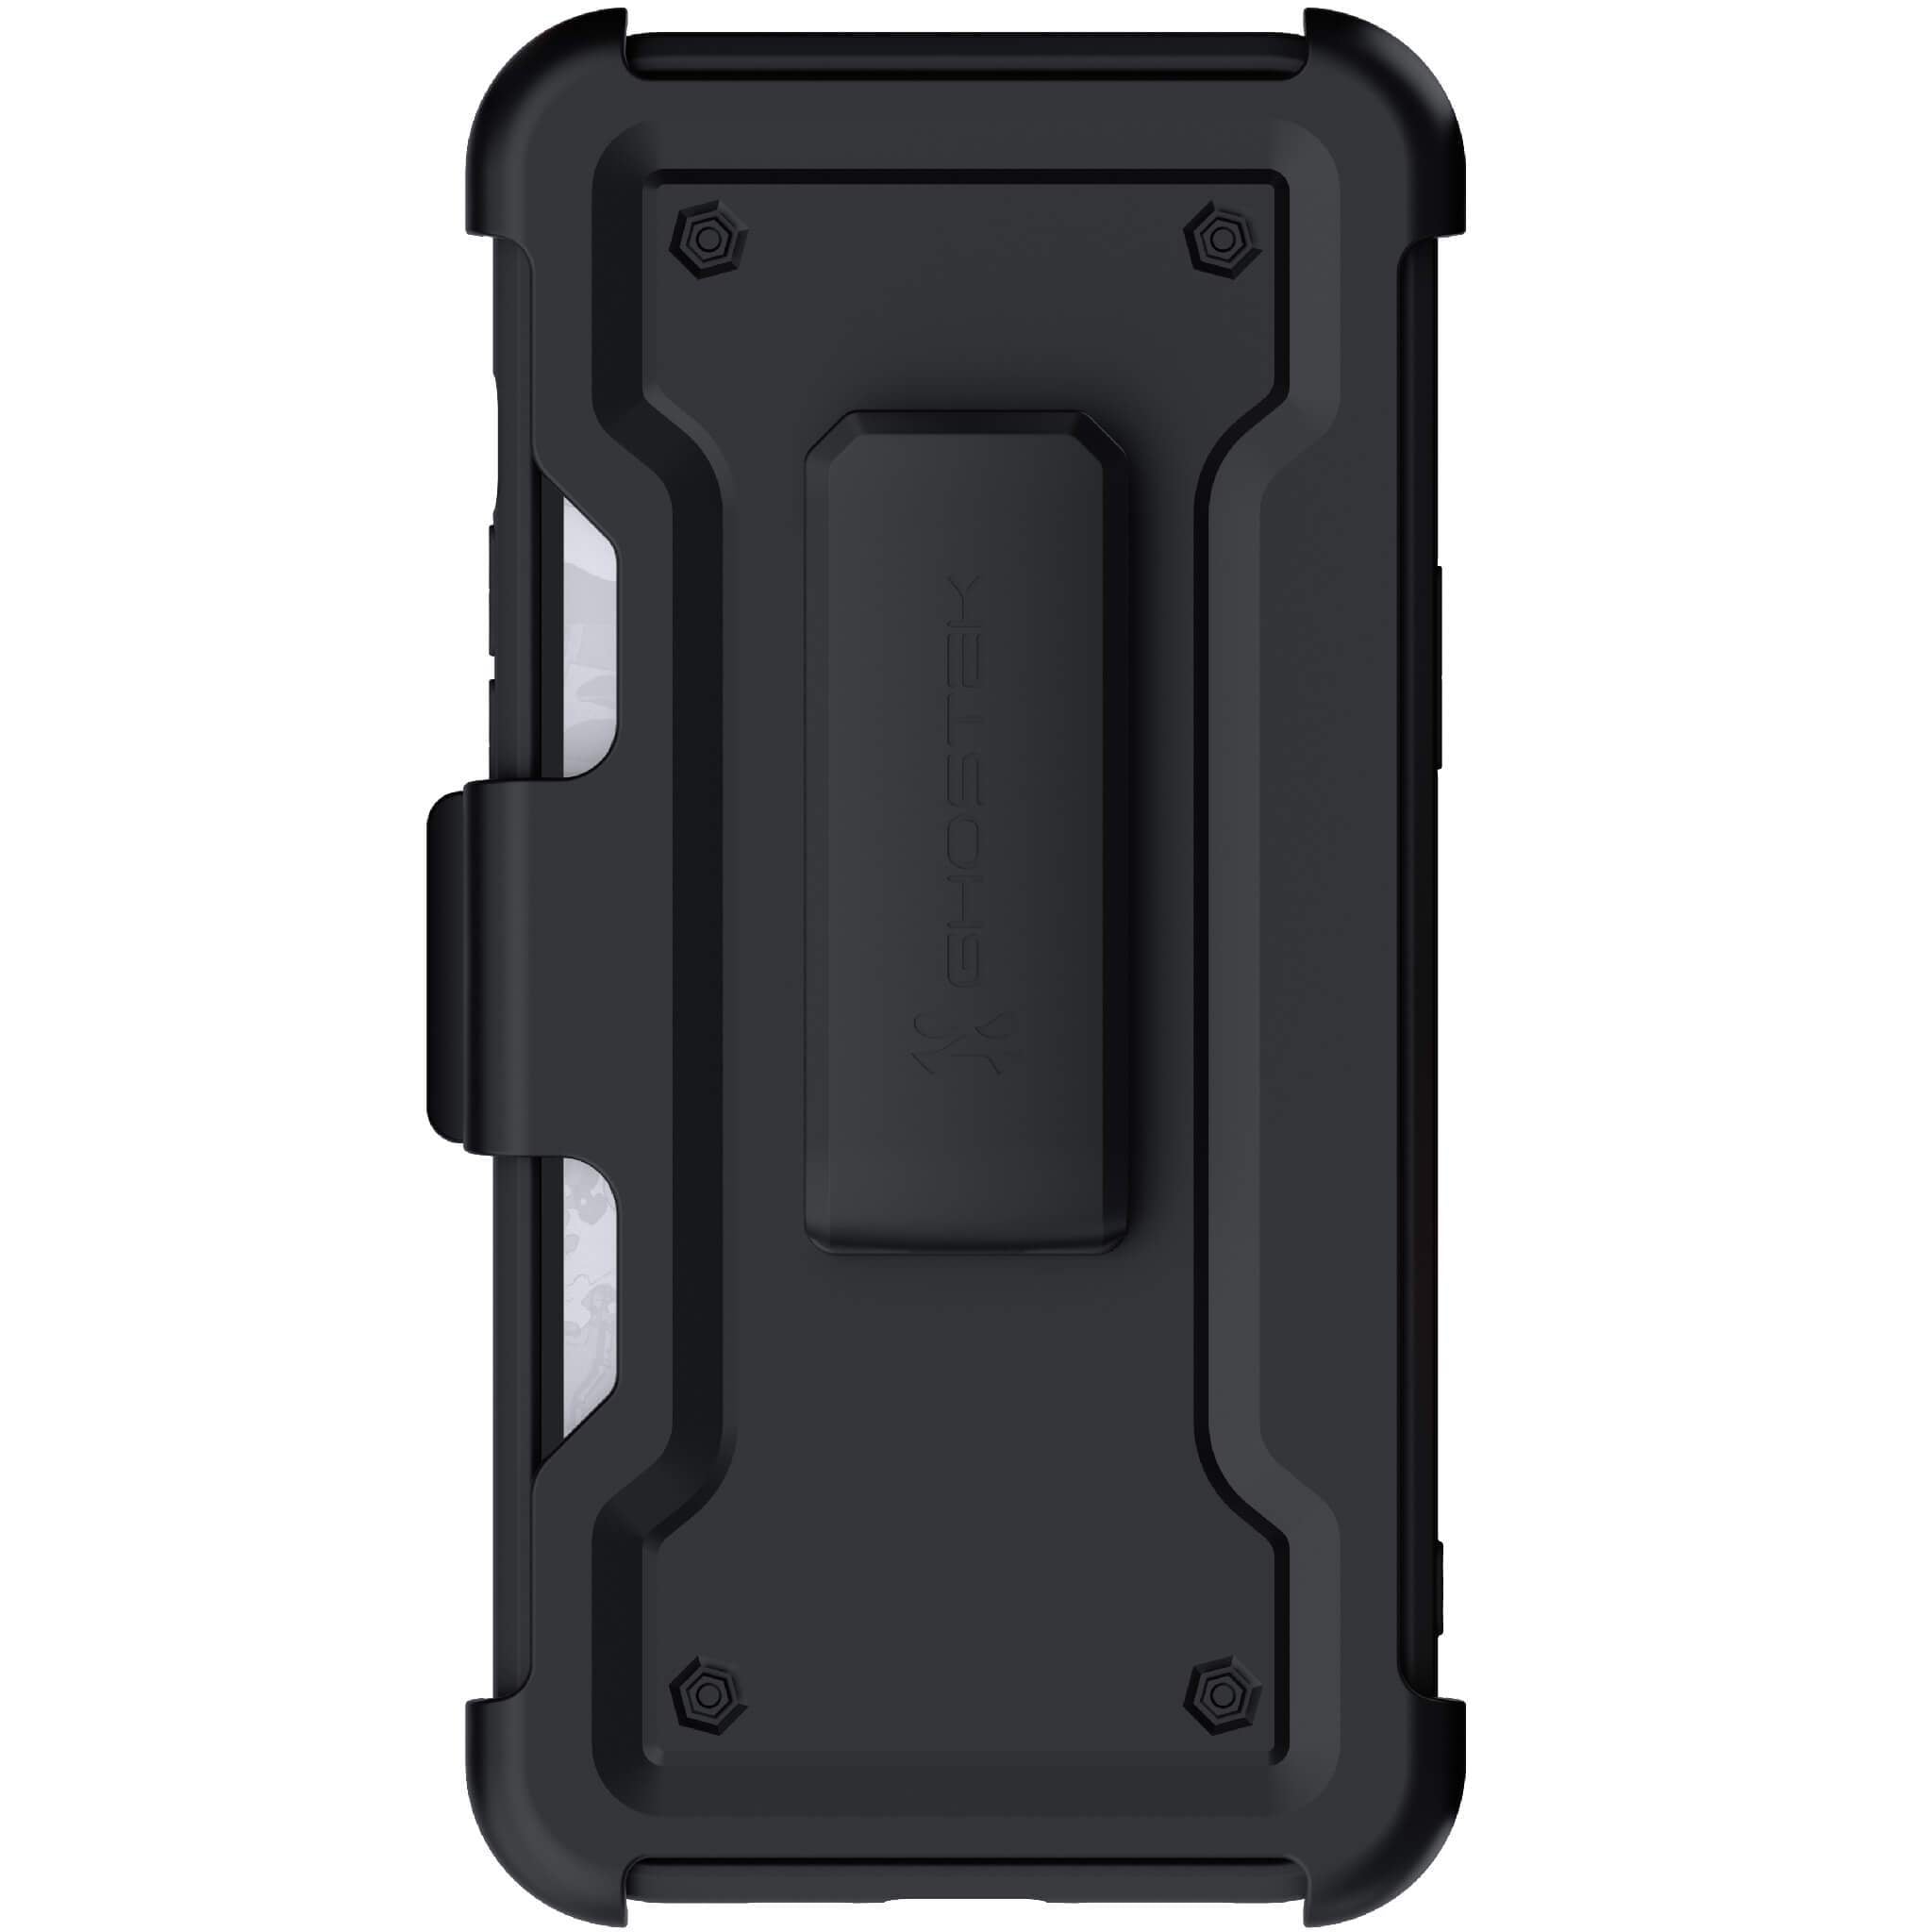 iPhone 12 Pro Max  - IRON ARMOR Belt Clip Holster Case with Stand and Card Holder [Matte Black]